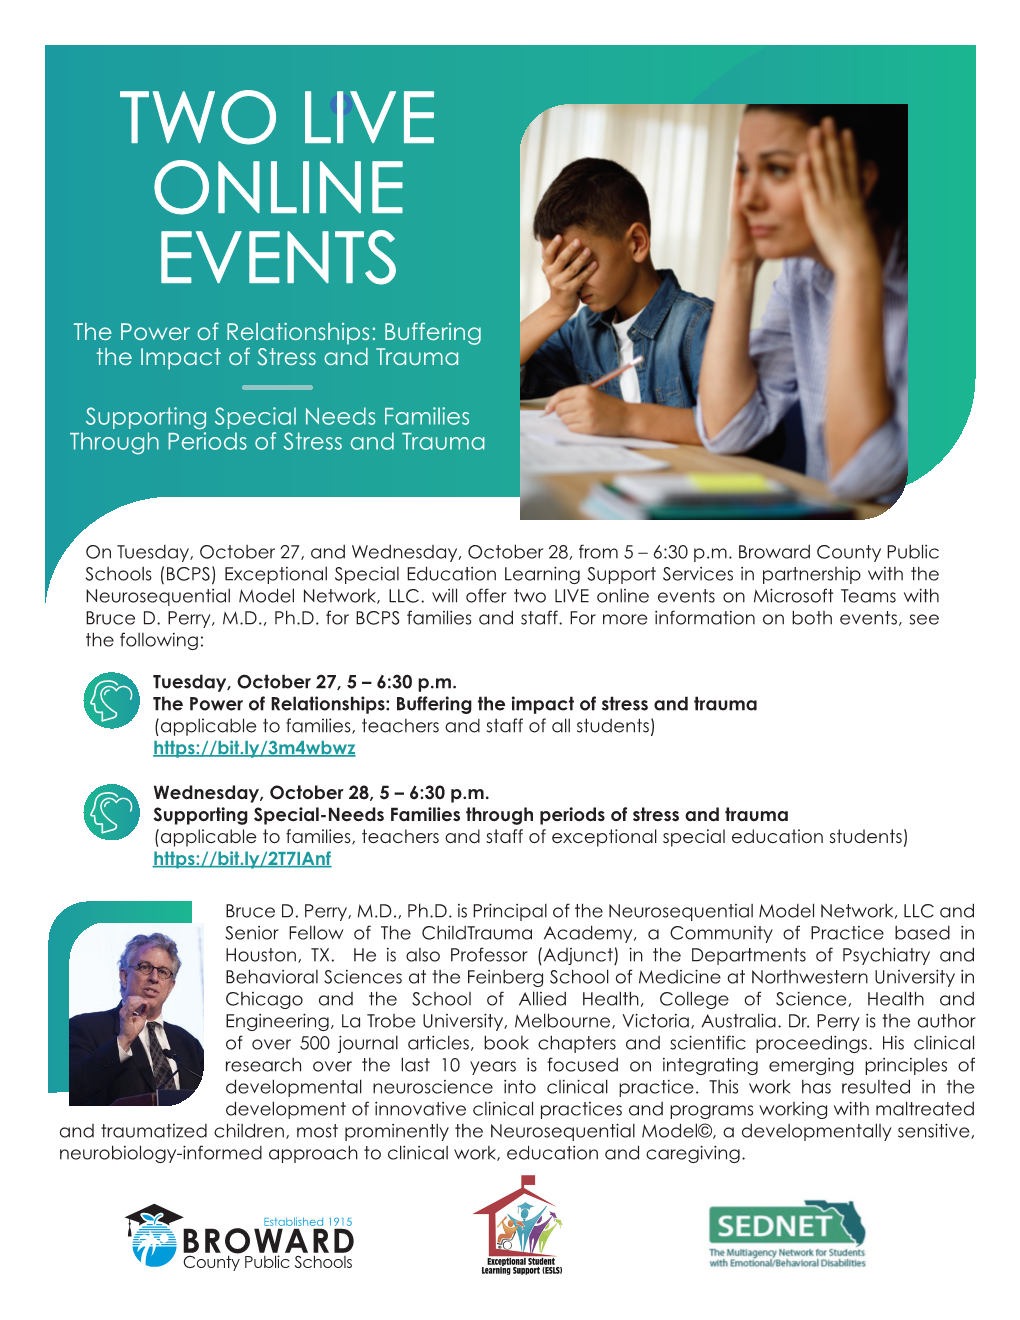 Two Online Events with Dr Perry